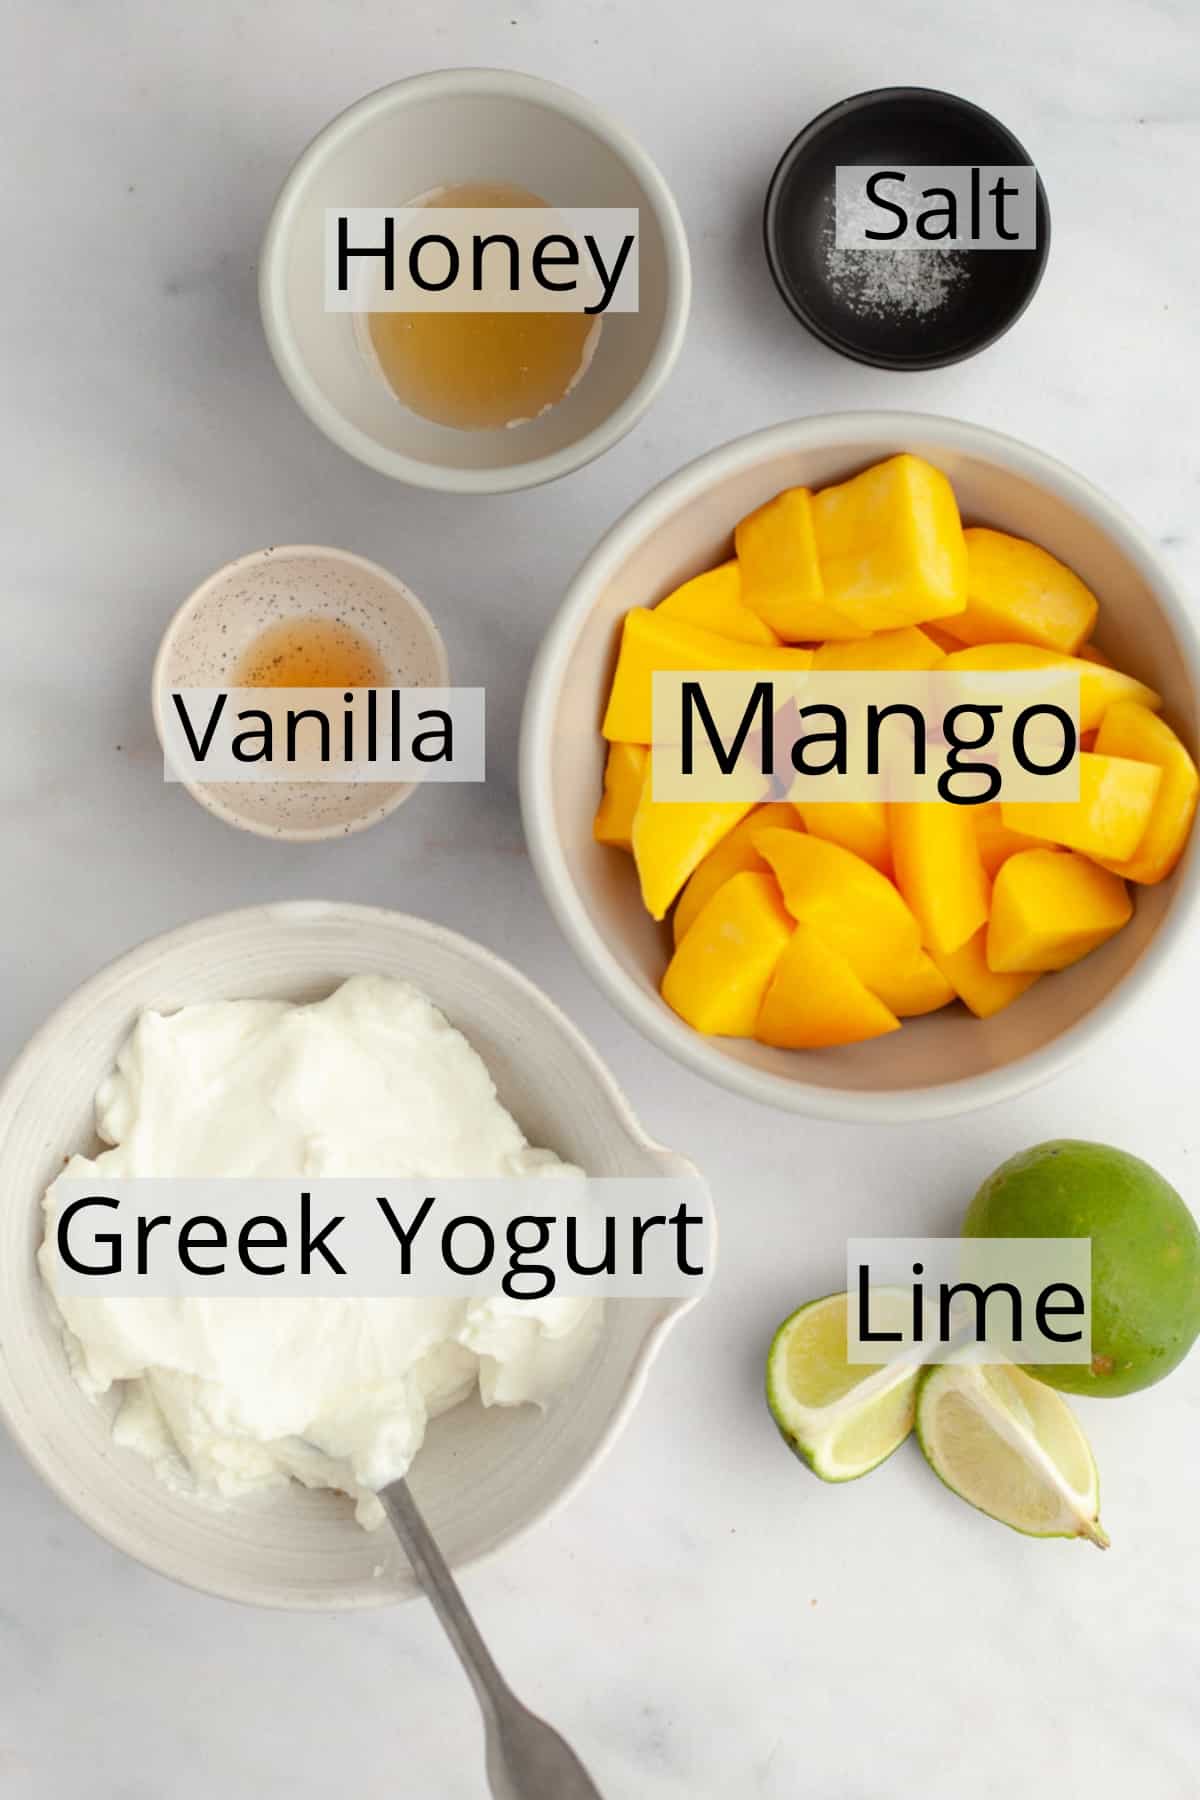 All the ingredients needed to make mango popsicles weighed out into small bowls.